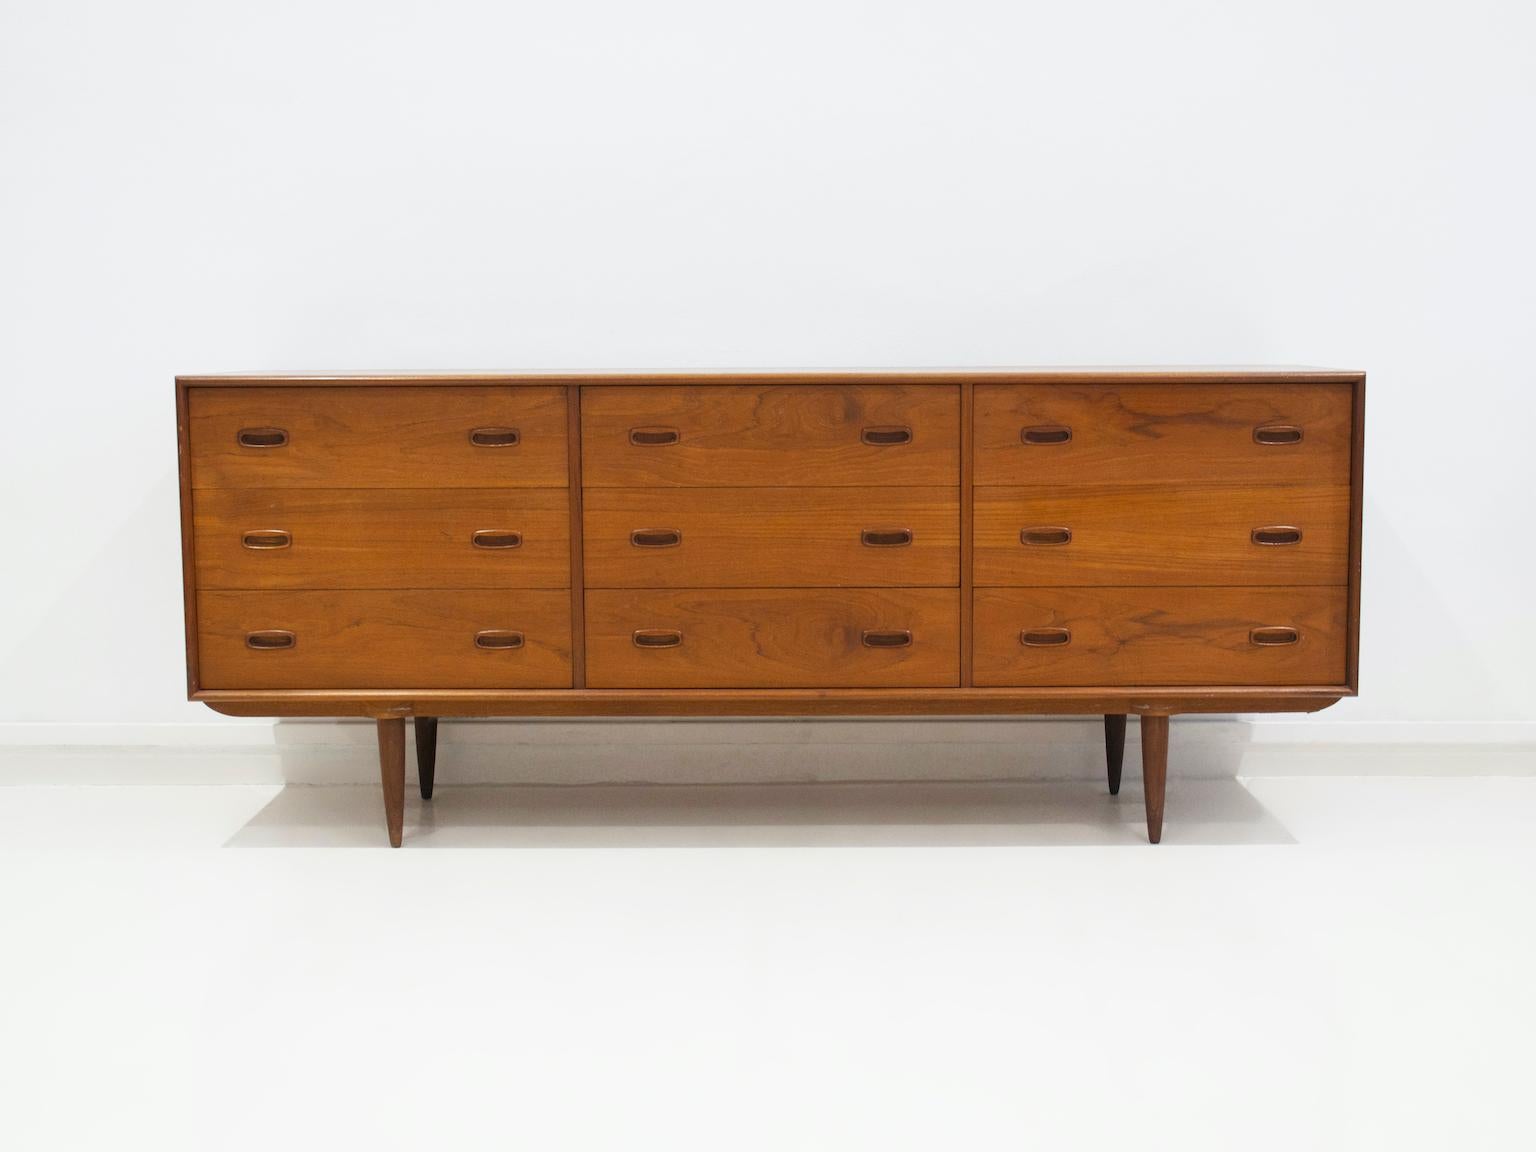 Scandinavian style teak sideboard with nine drawers from the 1960's. Tapered legs and built-in pulls on the drawers.